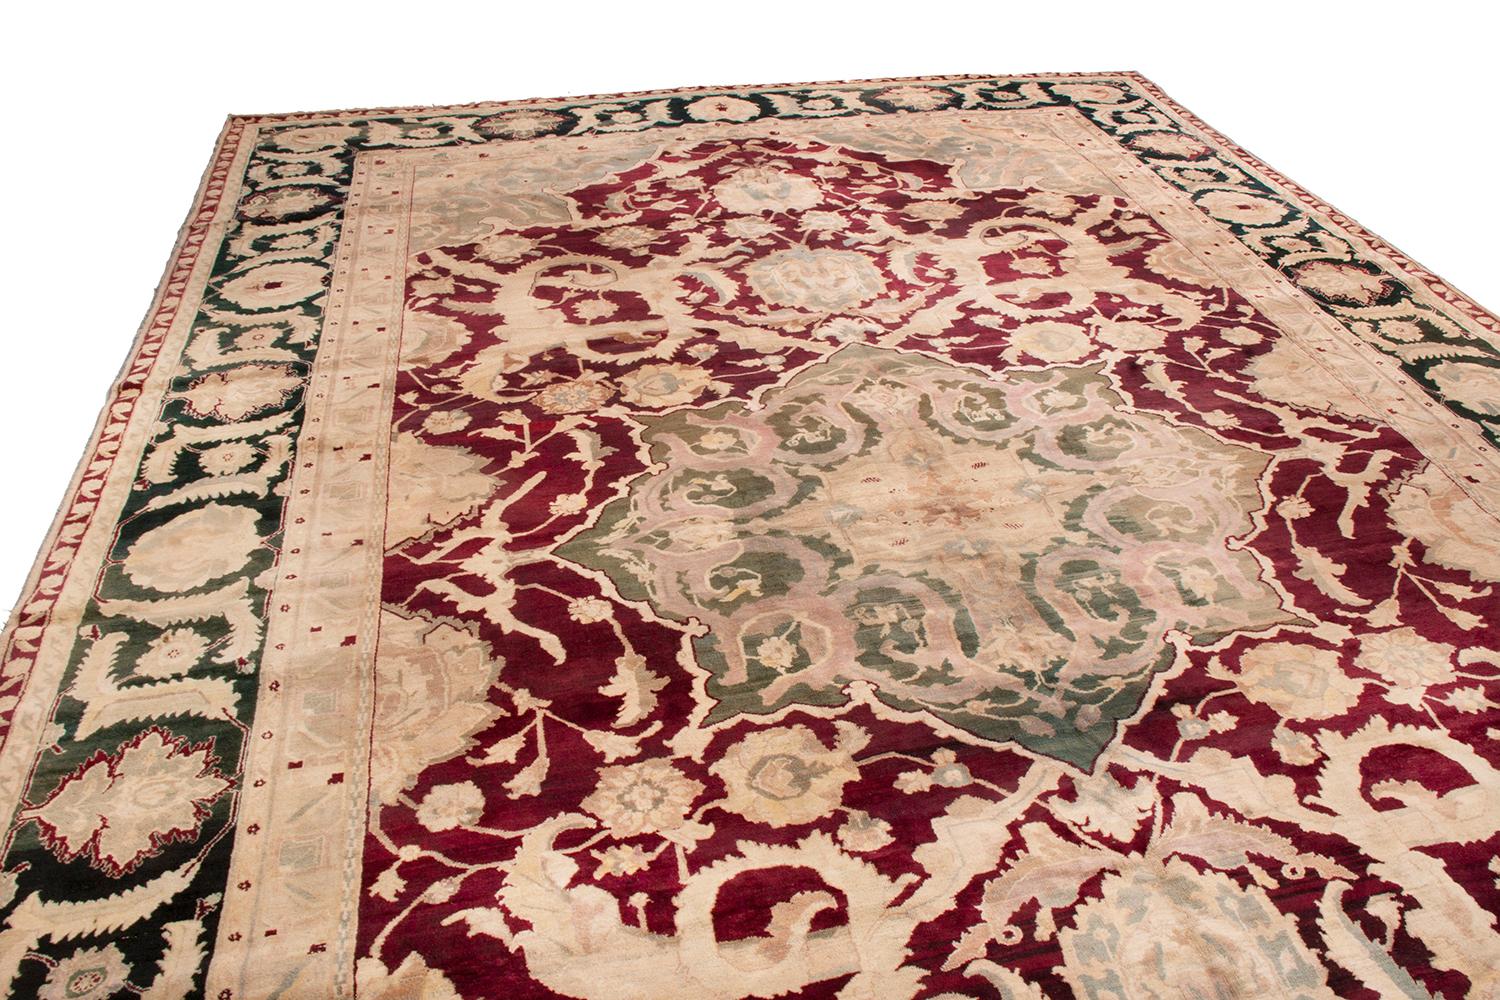 Hand knotted in wool originating from India, circa 1890-1900, this regal 10 x 17 antique rug connotes a unique traditional Agra rug design, borrowing rich influences from classic Polonaise rugs of the 17th century in its take on a venerated